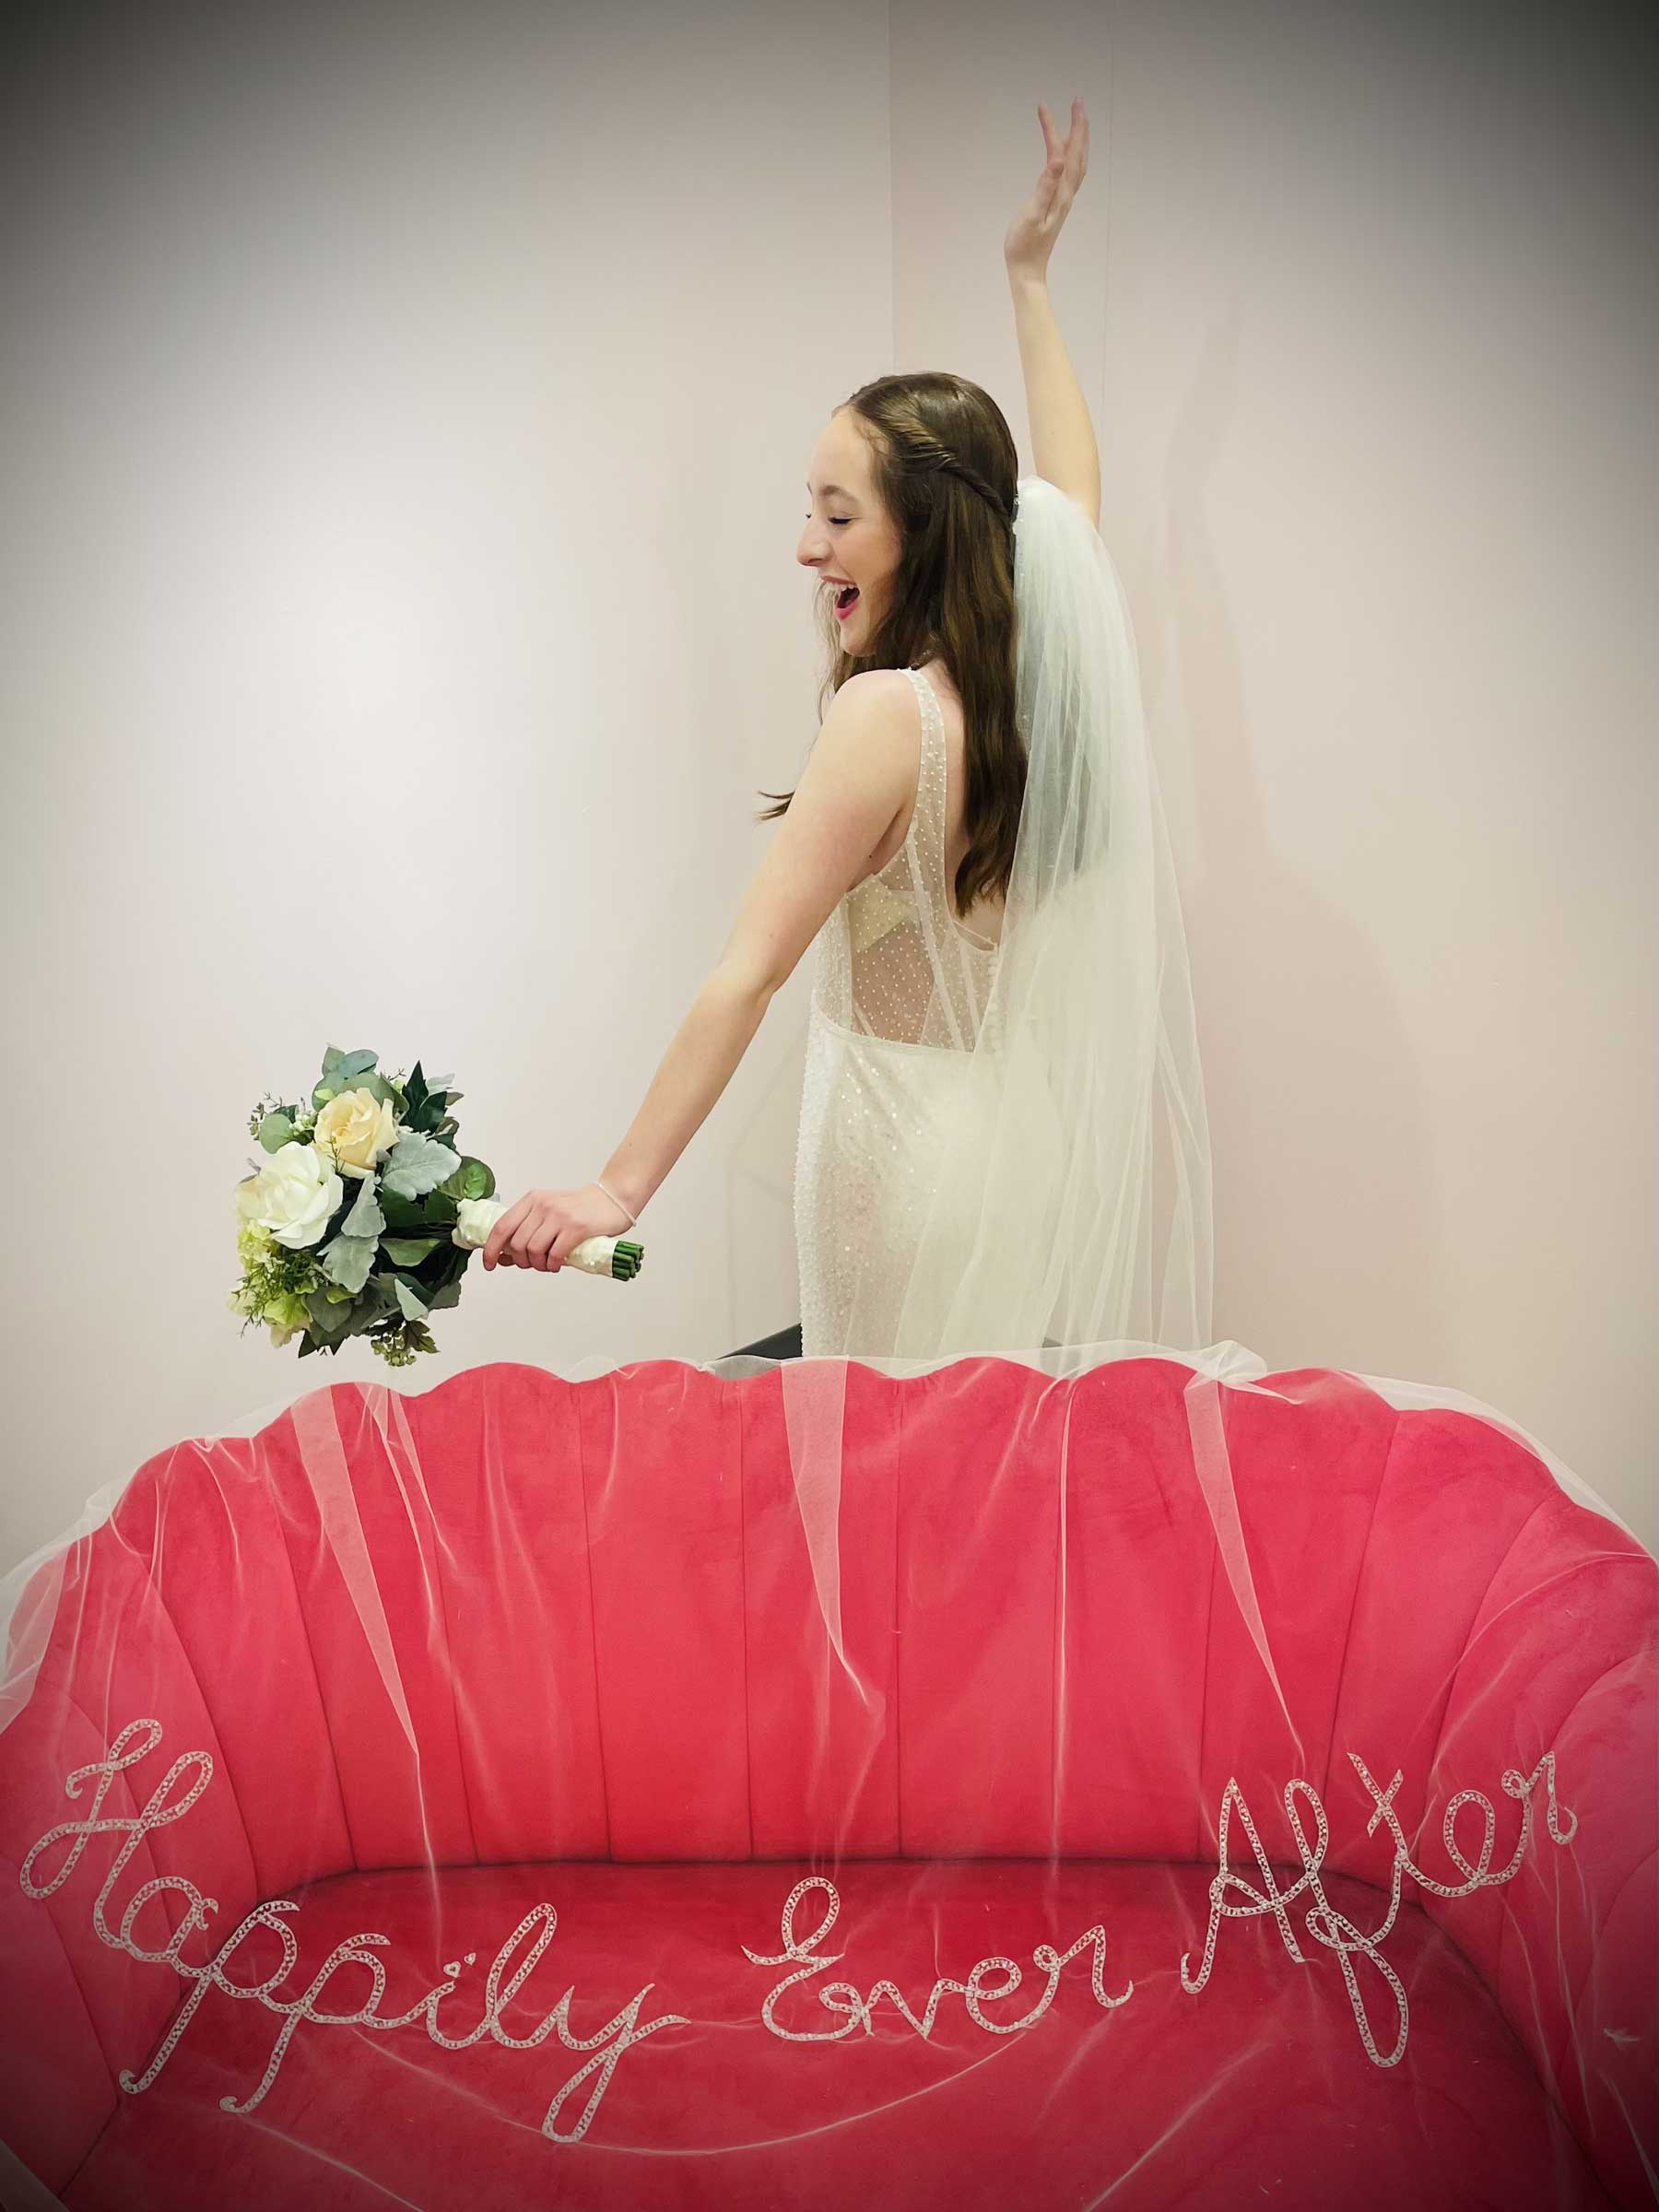 A bride in a wedding dress standing on top of a pink couch in a bridal shop.